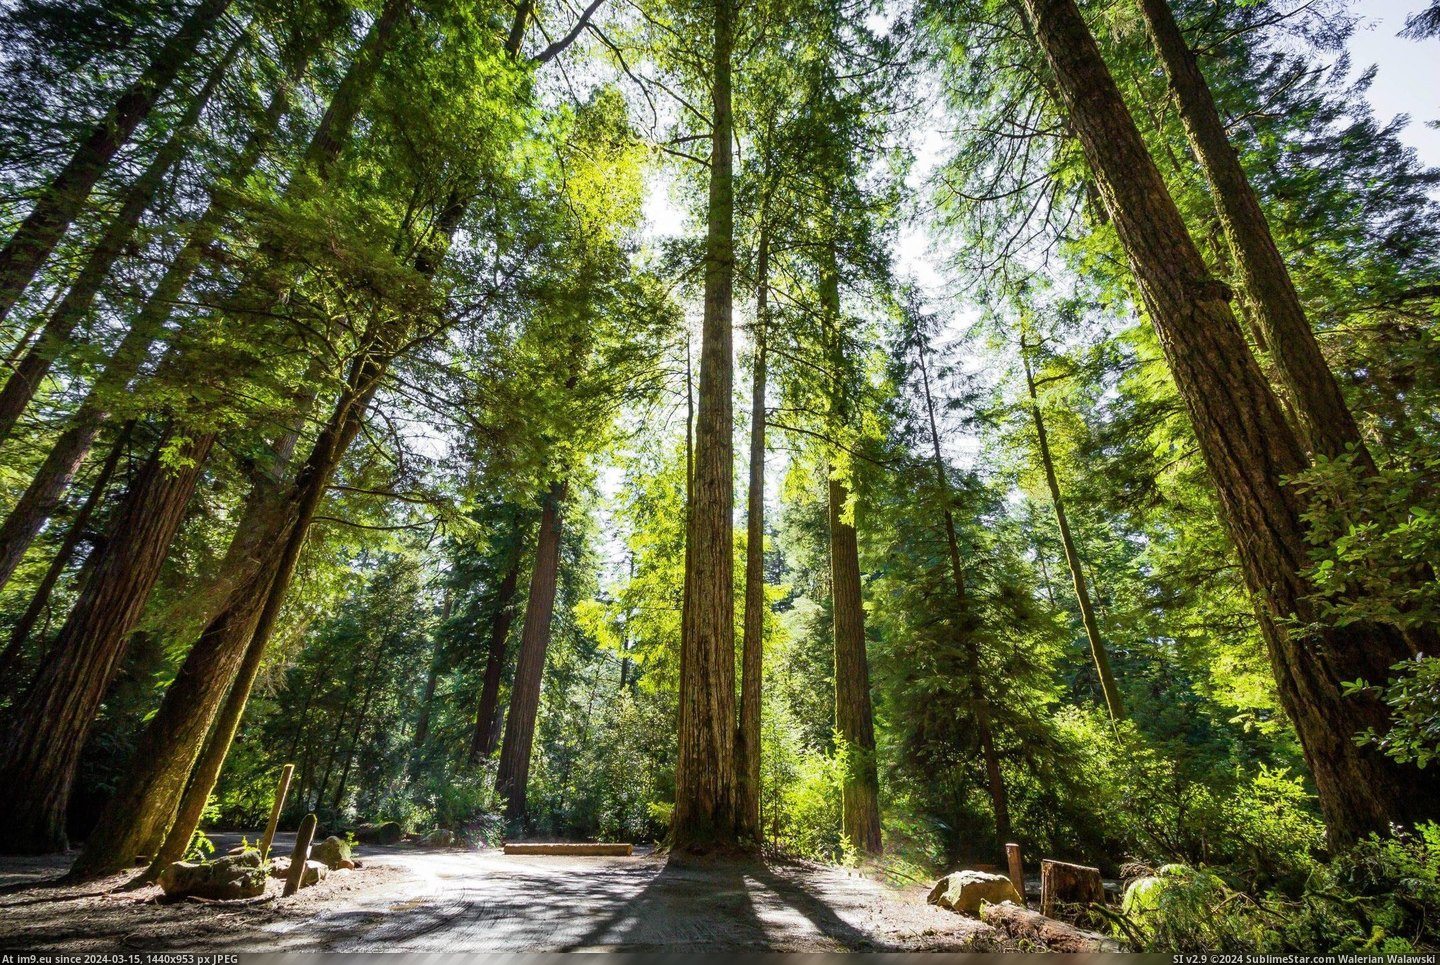 #Park #City #Smith #Redwoods #Crescent #State #Weekend [Earthporn] I went to the Jedediah Smith Redwoods State Park outside of Crescent City, CA this weekend [5110x3409] Pic. (Image of album My r/EARTHPORN favs))